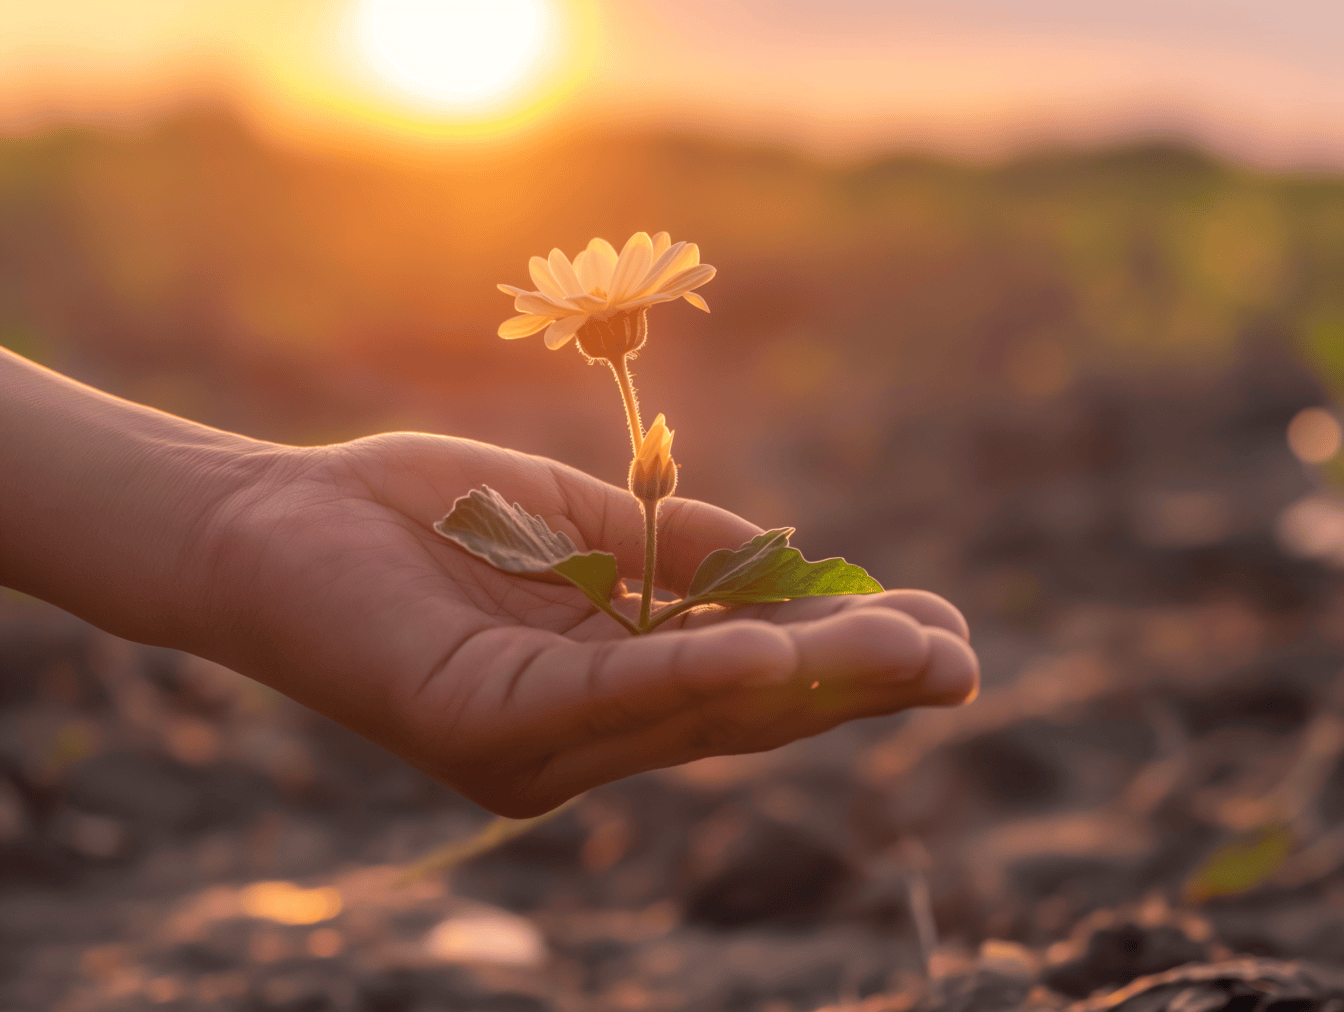 A flower in the palm of hand with dim sunlight at sunset as background